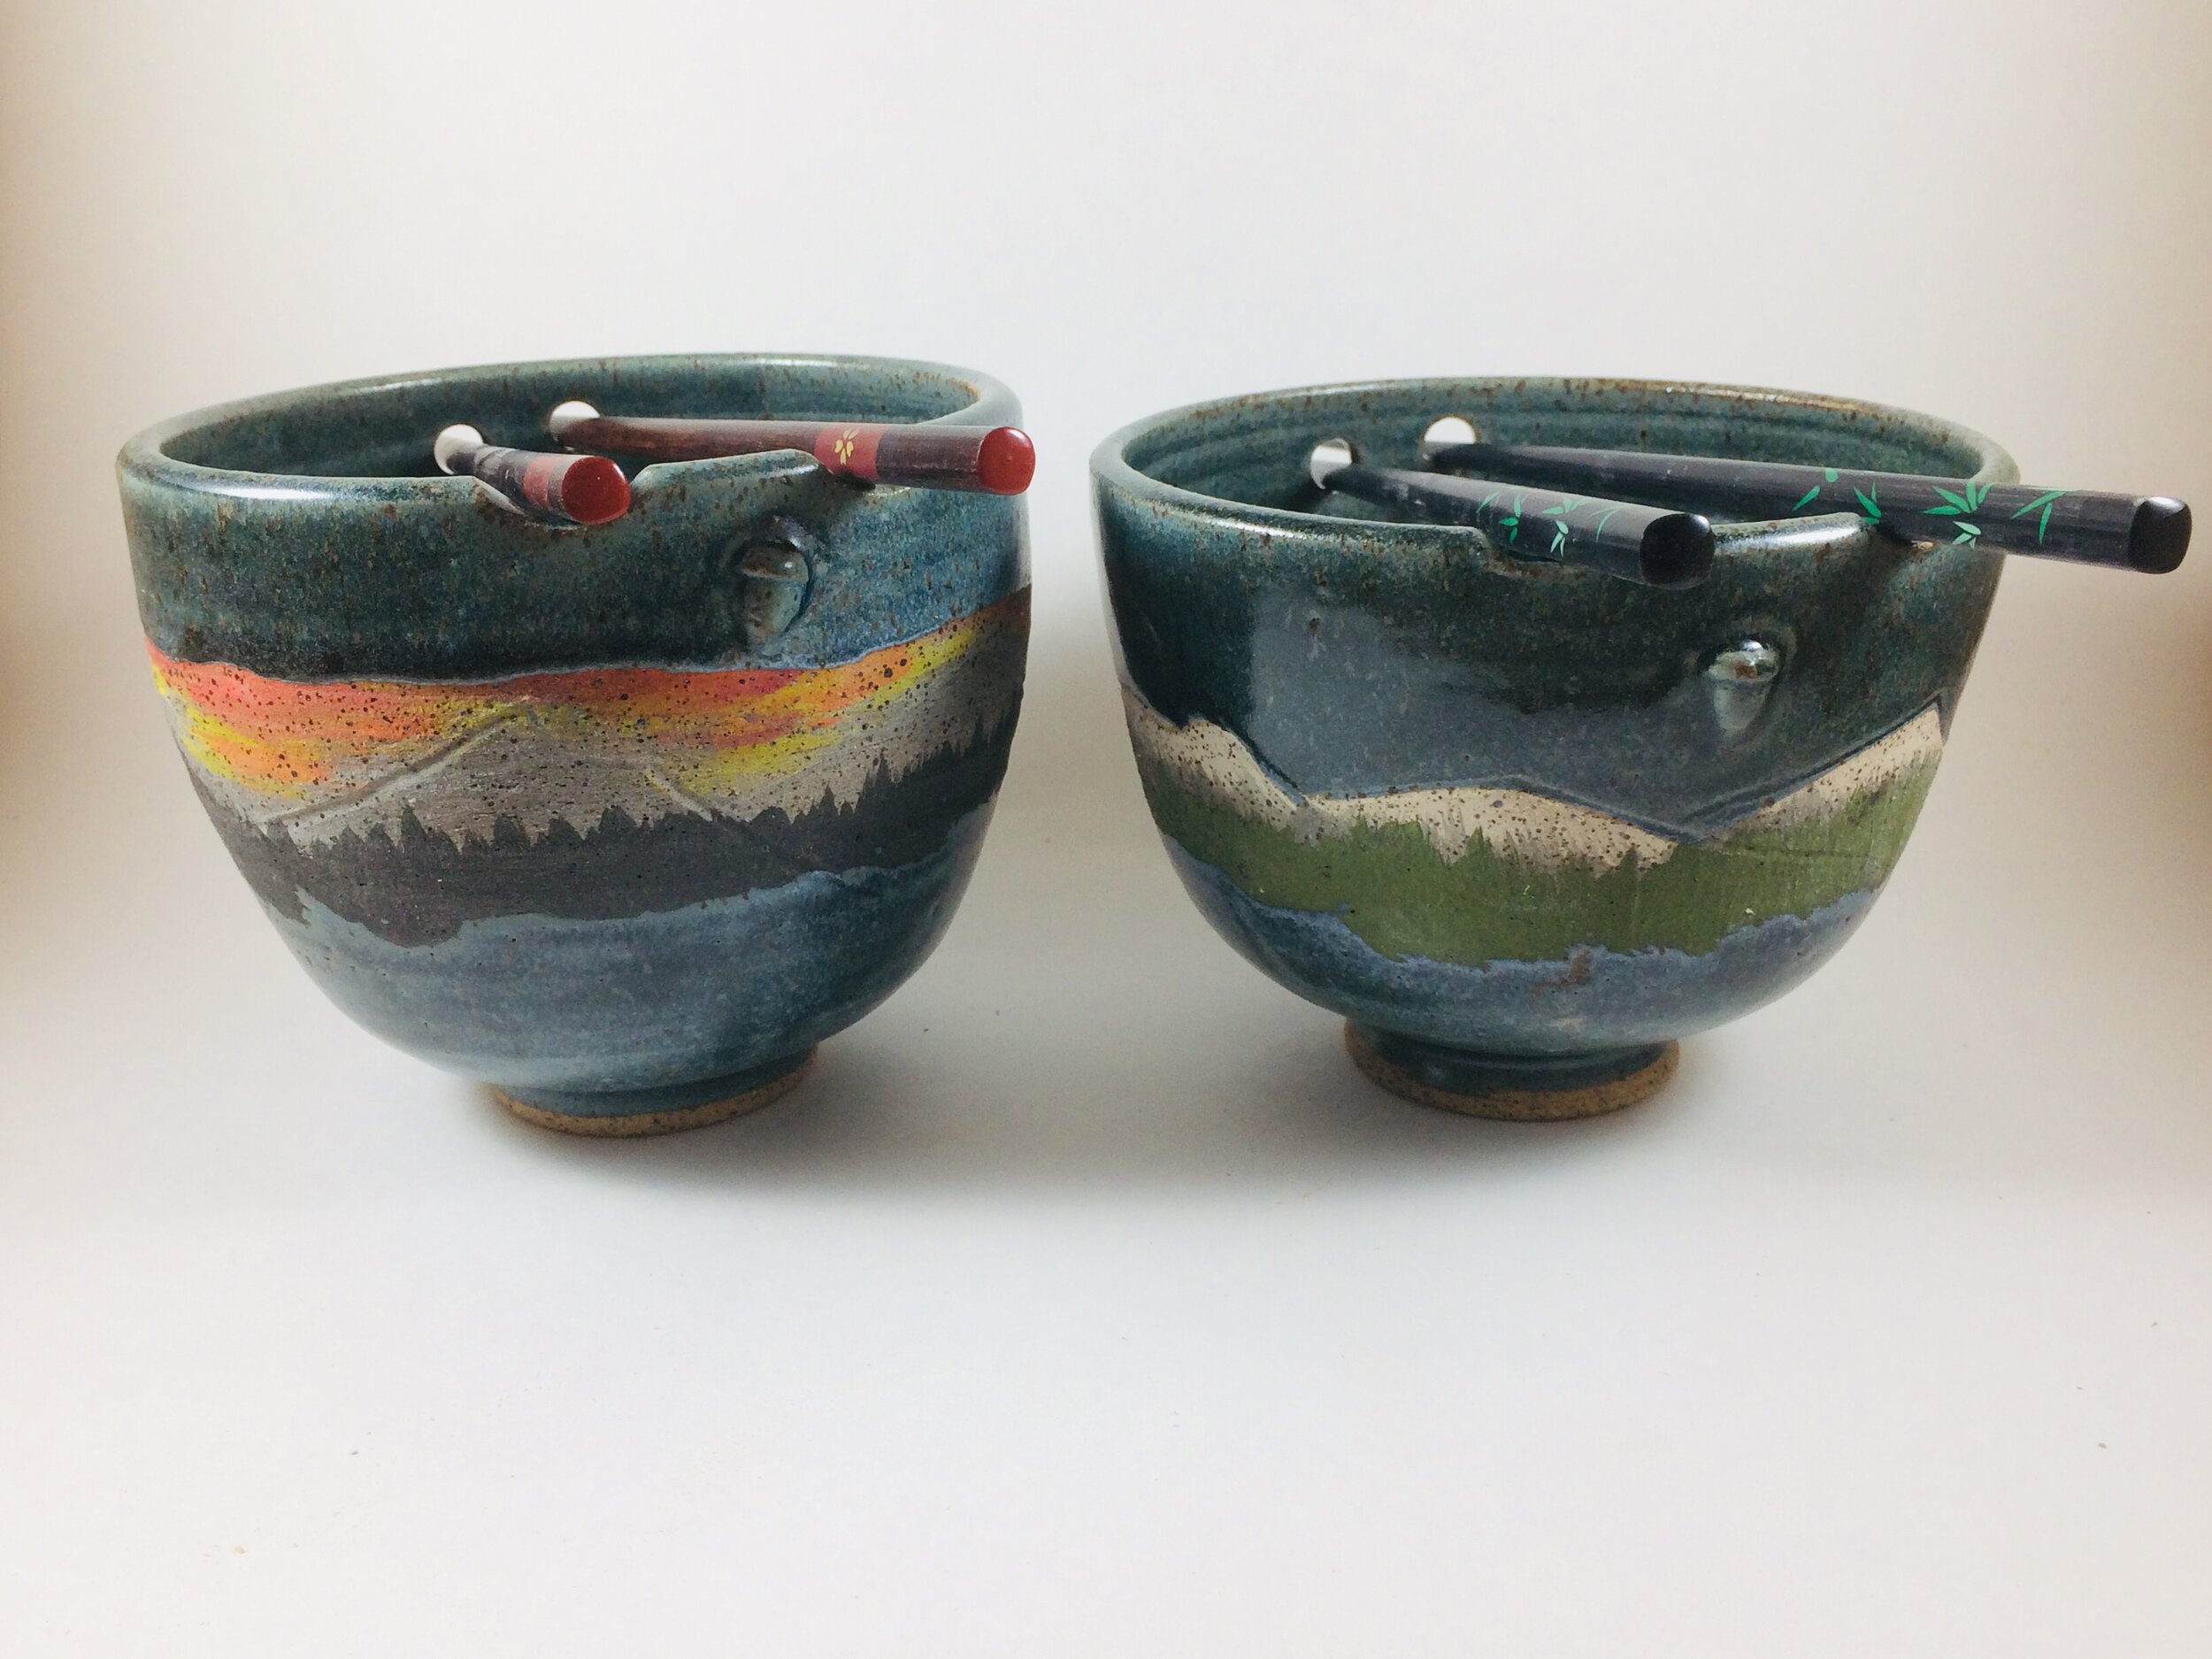 Mountain Pattern bowls handcrafted by Michael Gibbons of Nutfield Pottery, Derry, NH, USA